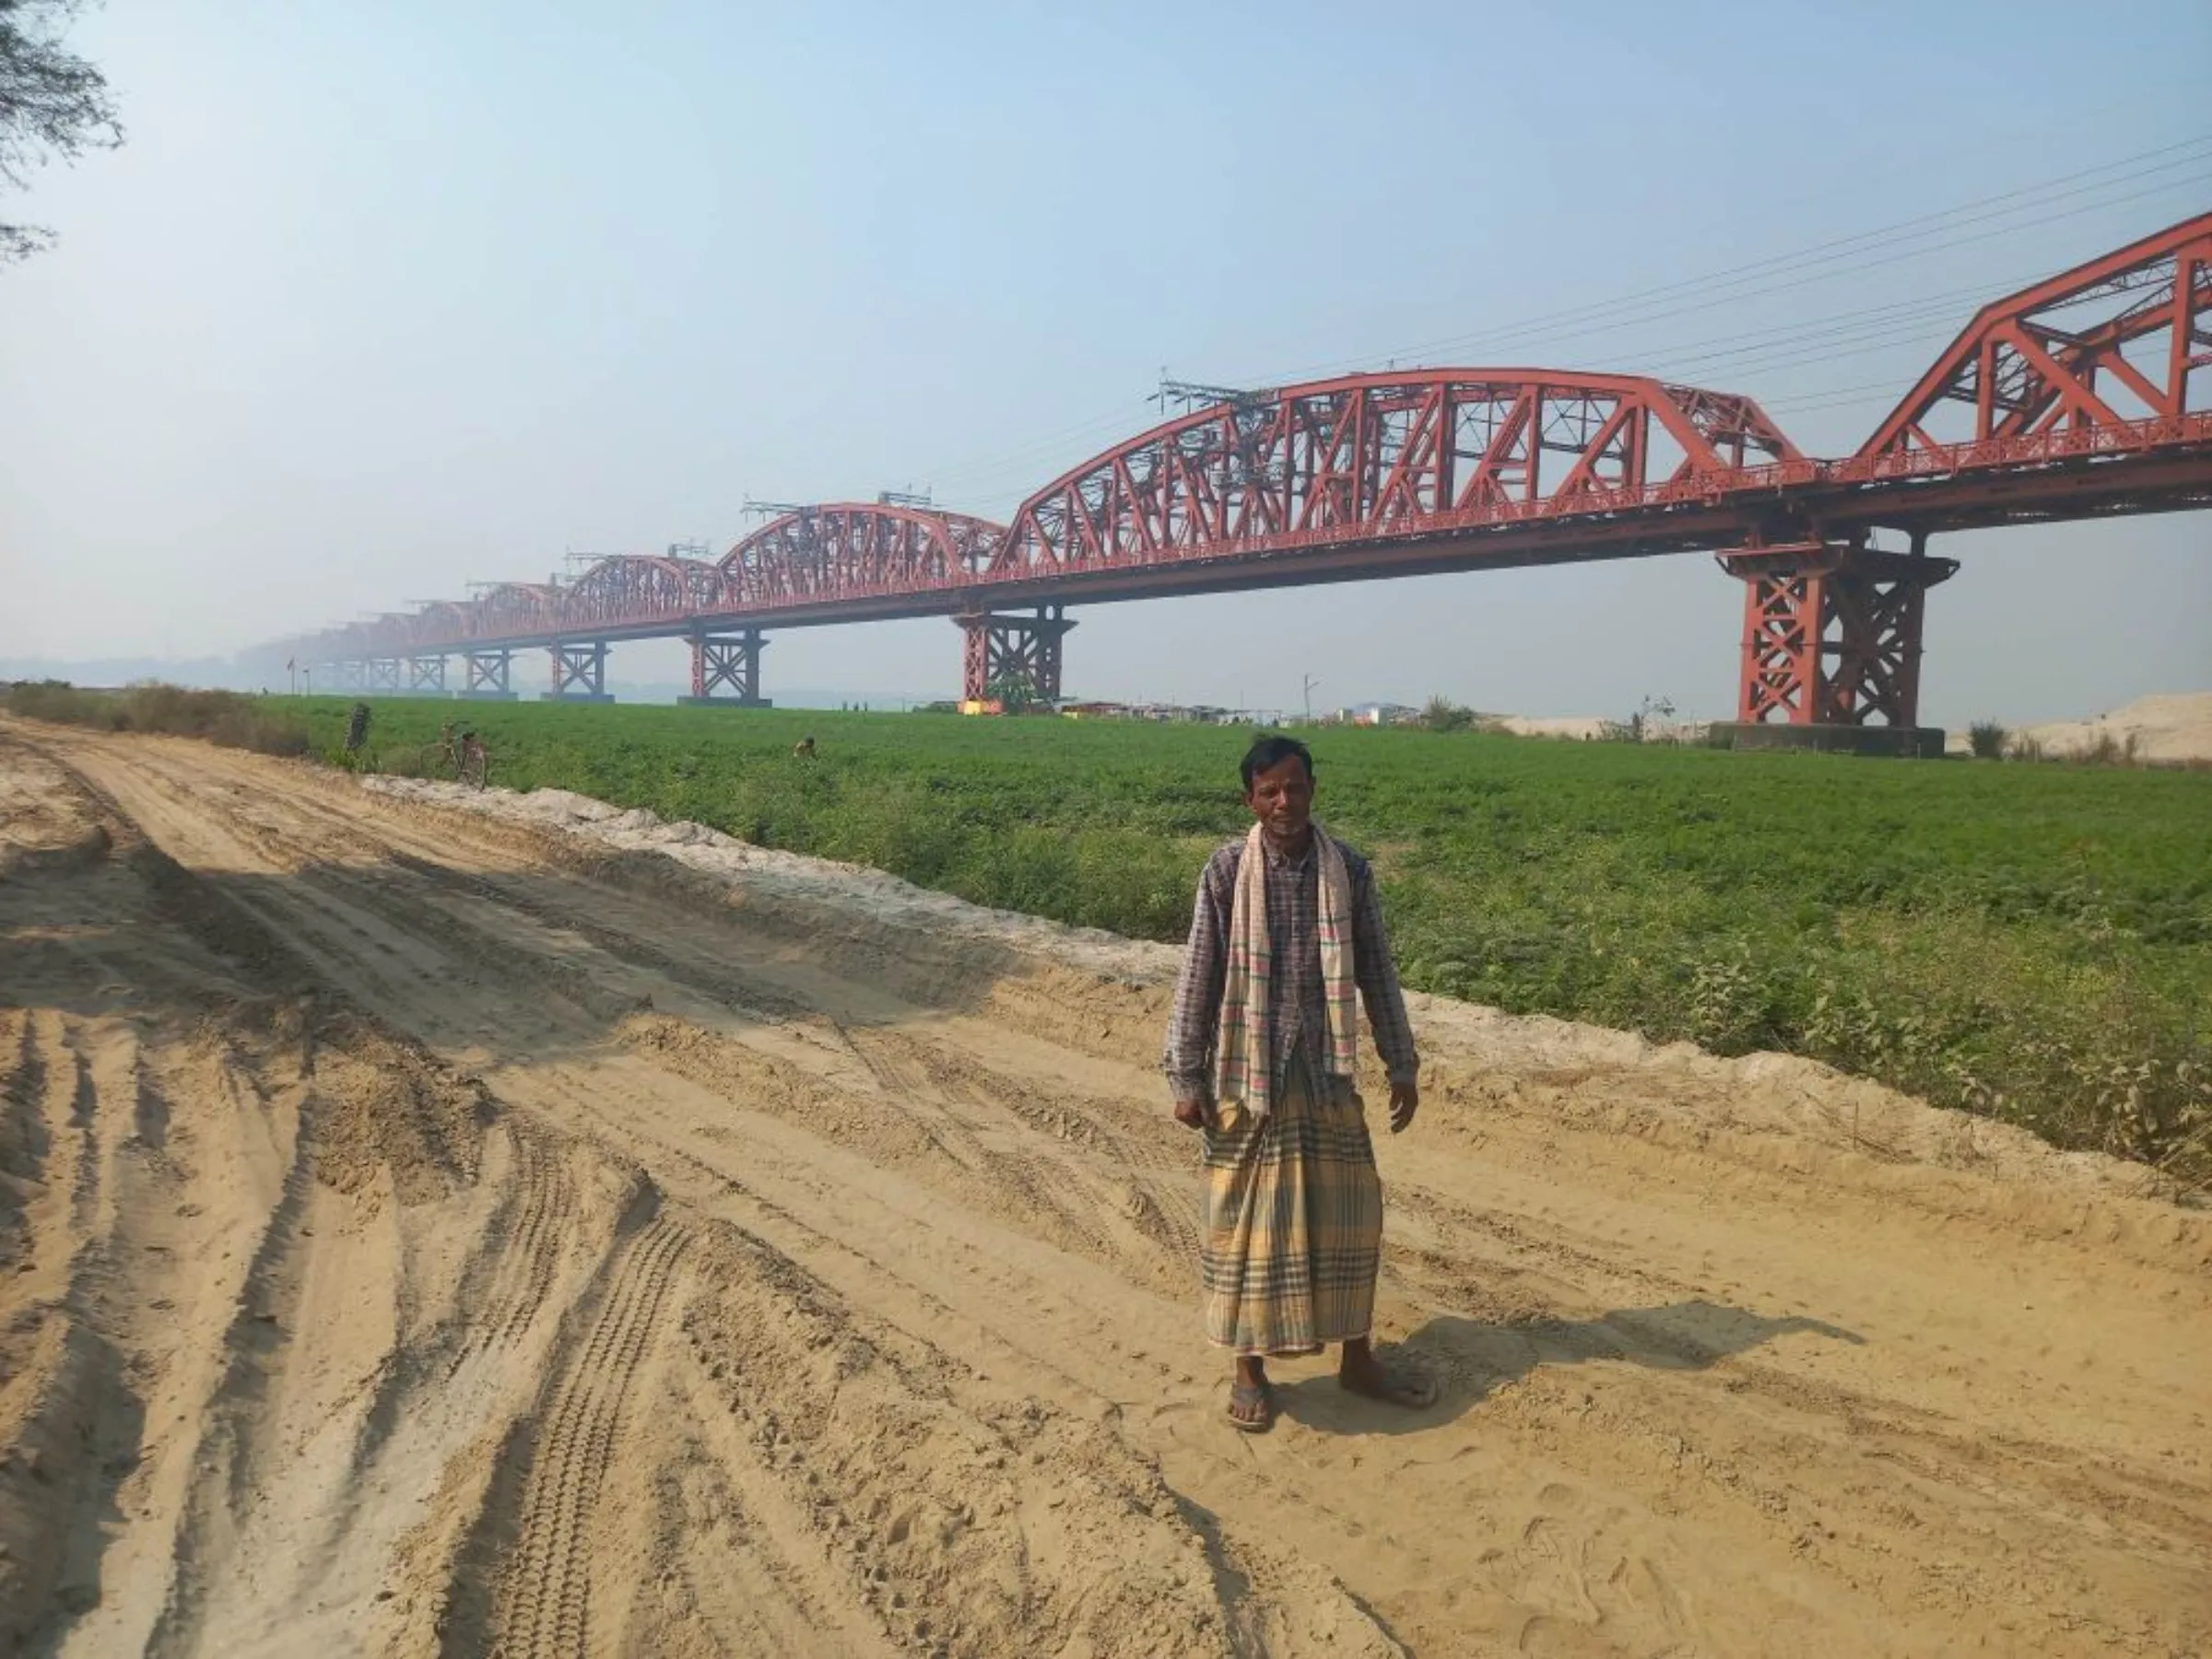 Rickshaw-puller Saidul Islam, 50, poses for a photo before the century-old Hardinge Bridge across the Padma River on whose bank the Rooppur plant is situated,  Bangladesh, 15 December 2022